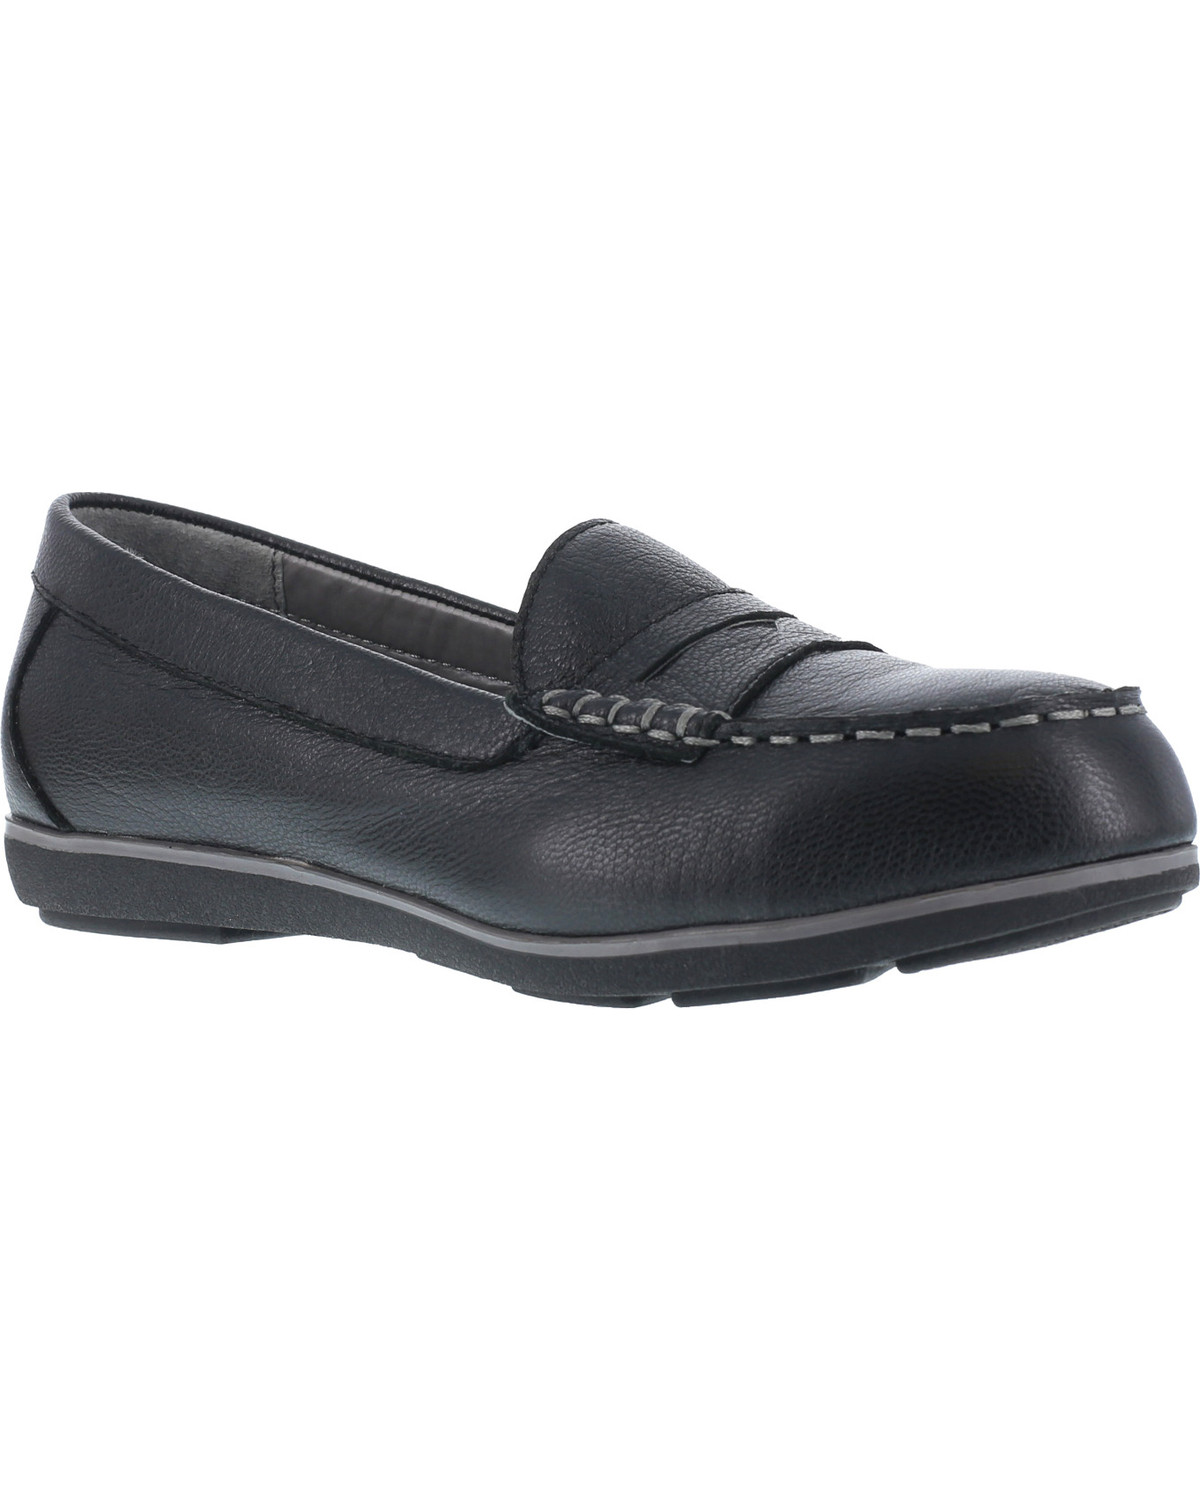 women's safety toe dress shoes